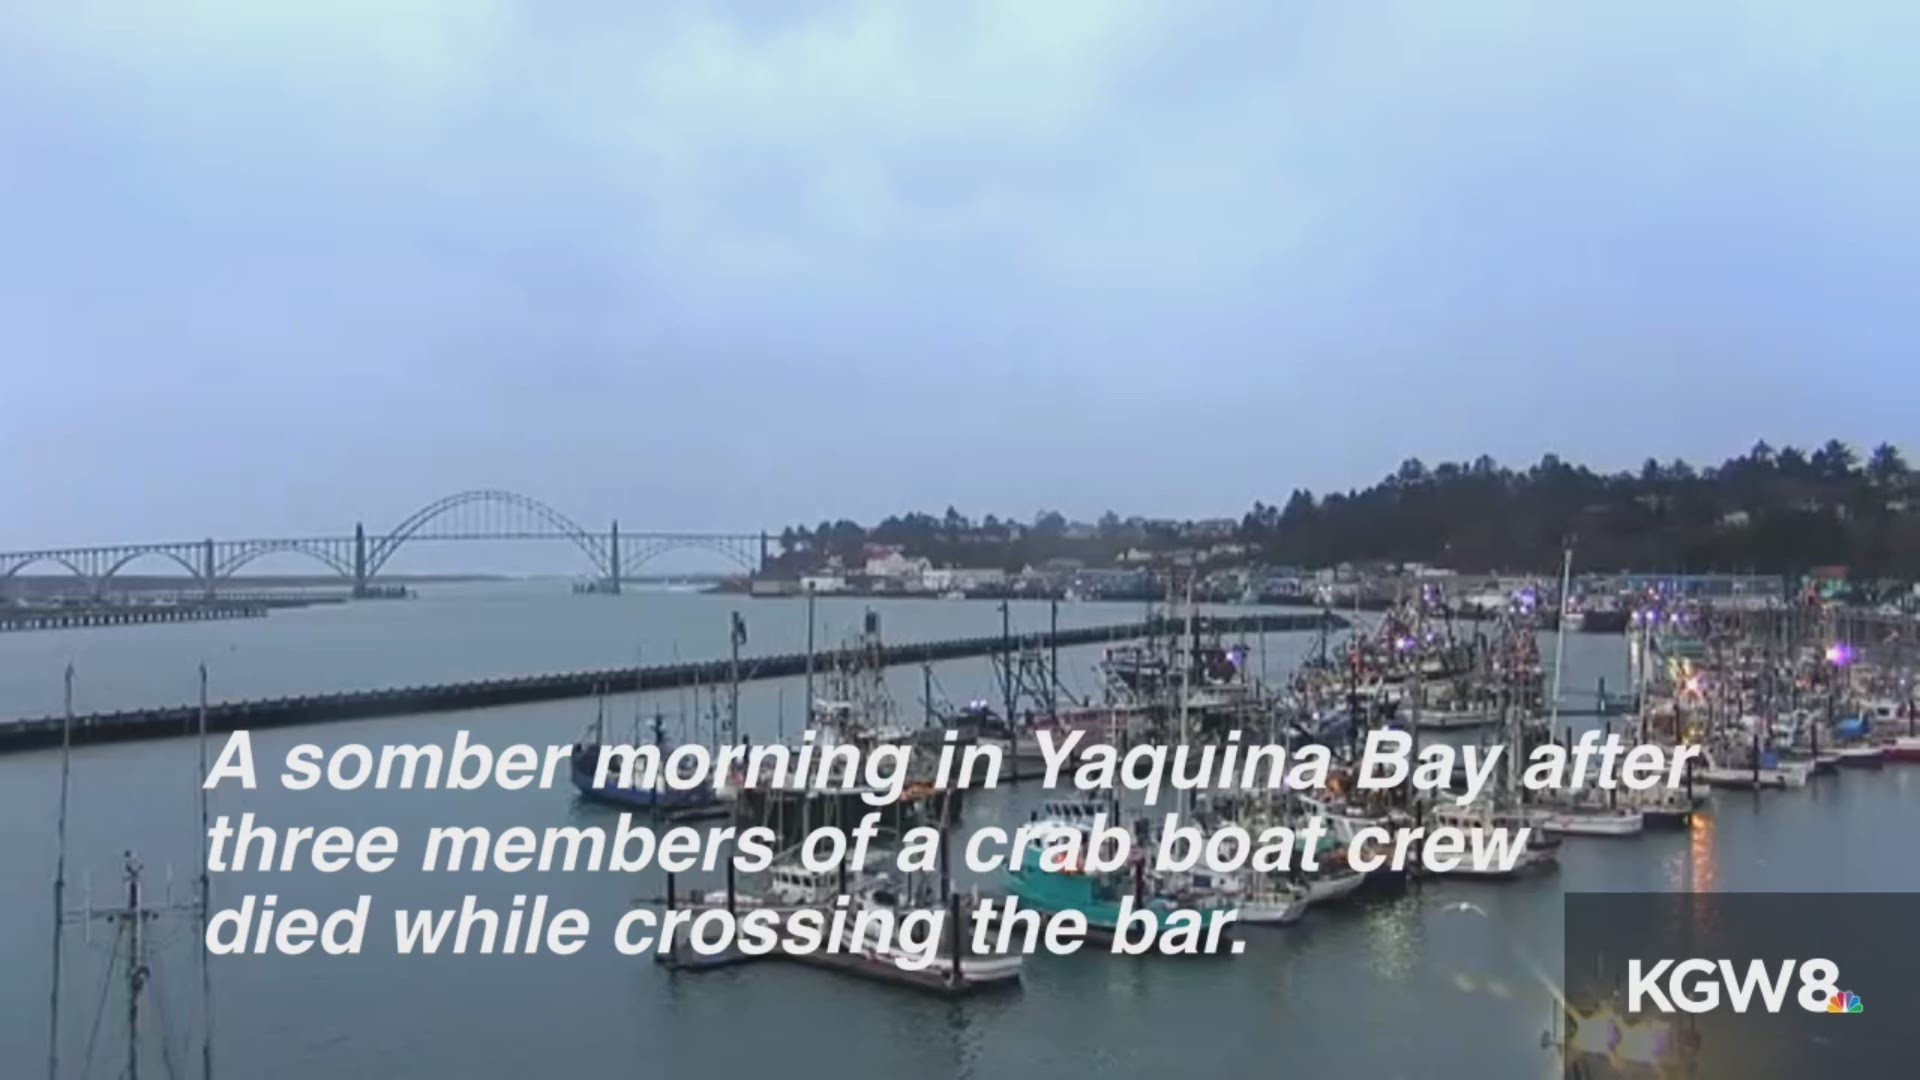 Three men were killed when a crab boat capsized Tuesday night at Yaquina Bay.